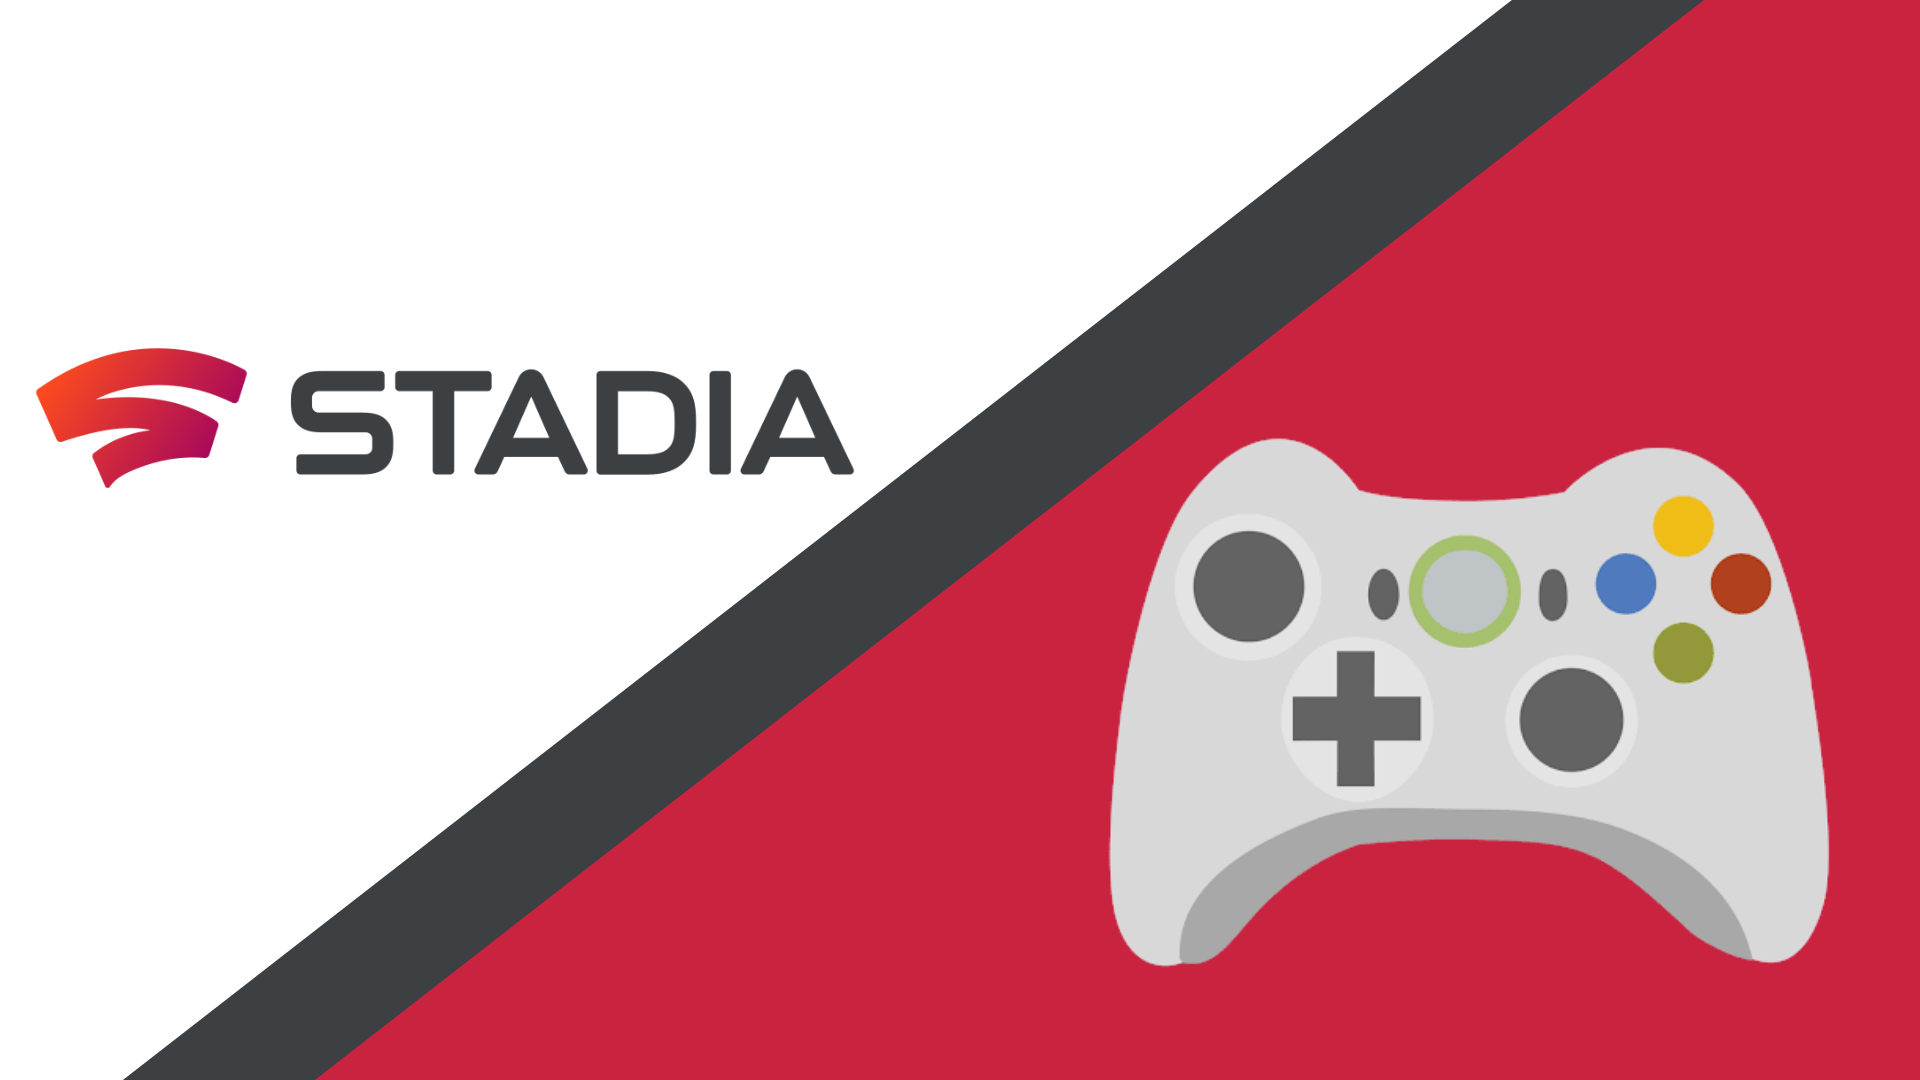 Google Stadia gains stable support for streaming over mobile data, Cisco signs up BT for new service to speed up video streaming And Other Top News